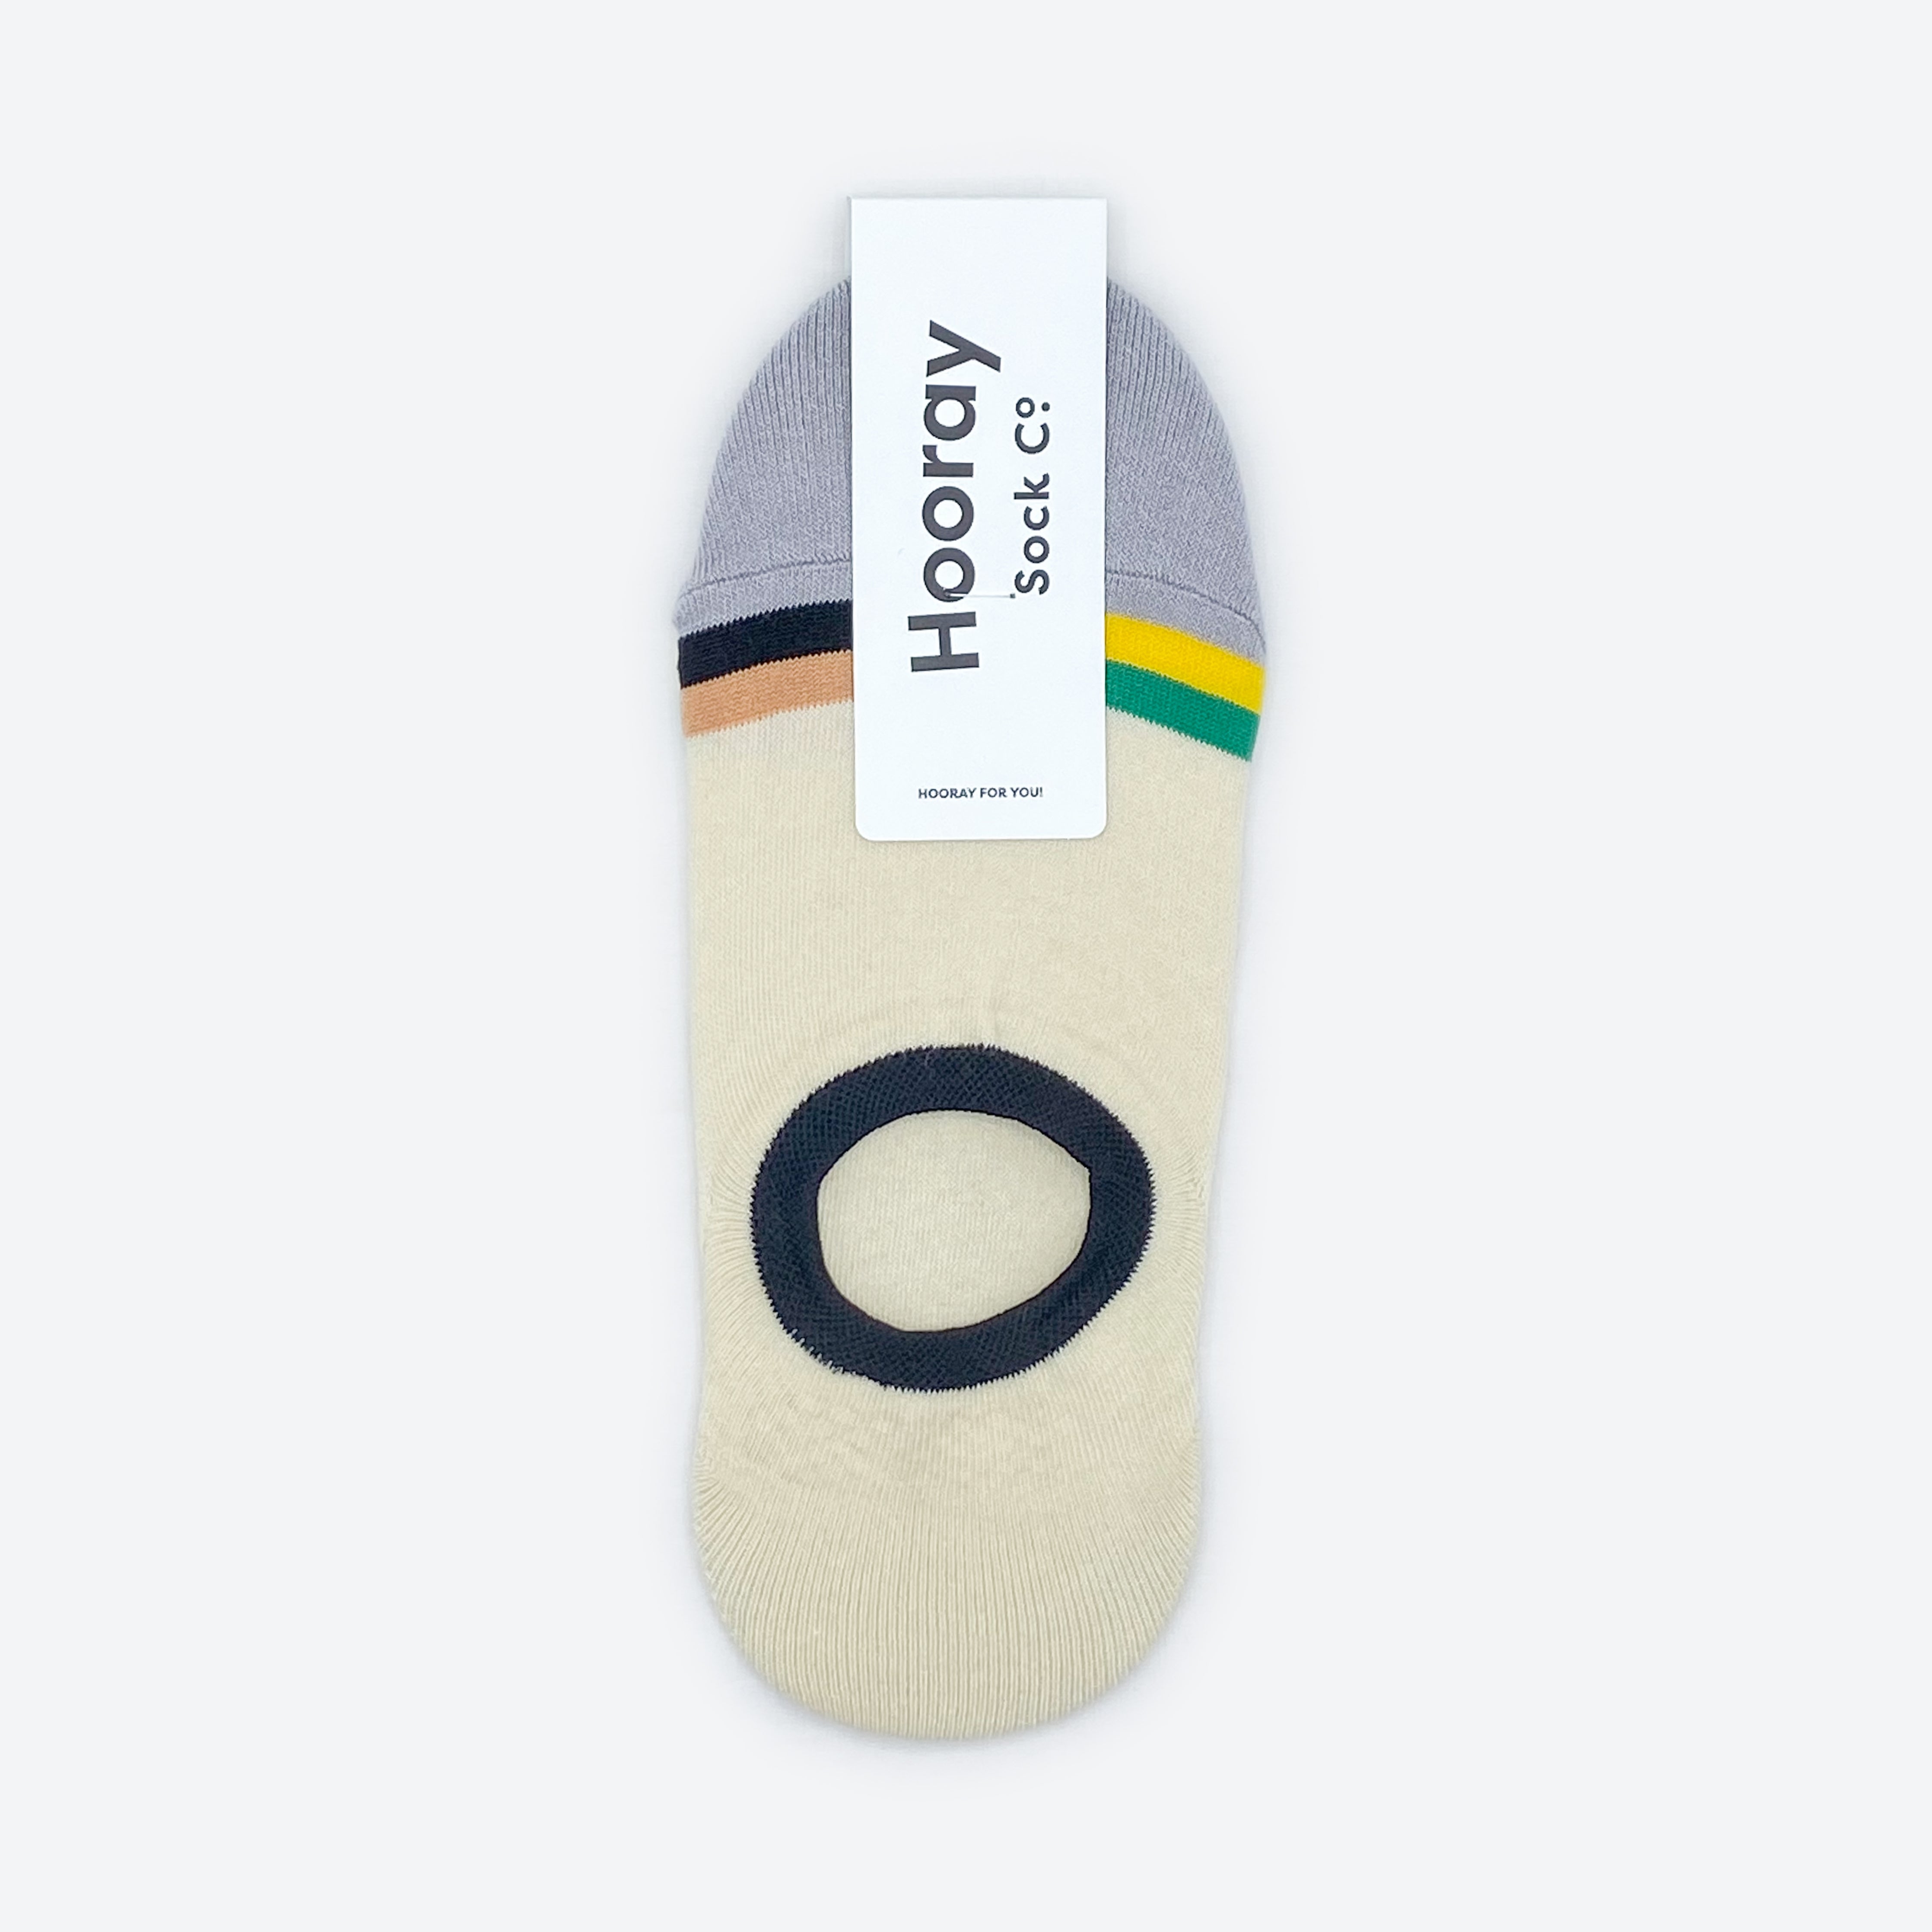 Hooray Sock Co. Marina No Show Socks. Lightweight, minimal, perfect for hot weather. Heel grips for secure fit. Size: Large (US men’s 8-12), Small (US women&#39;s 4-10)